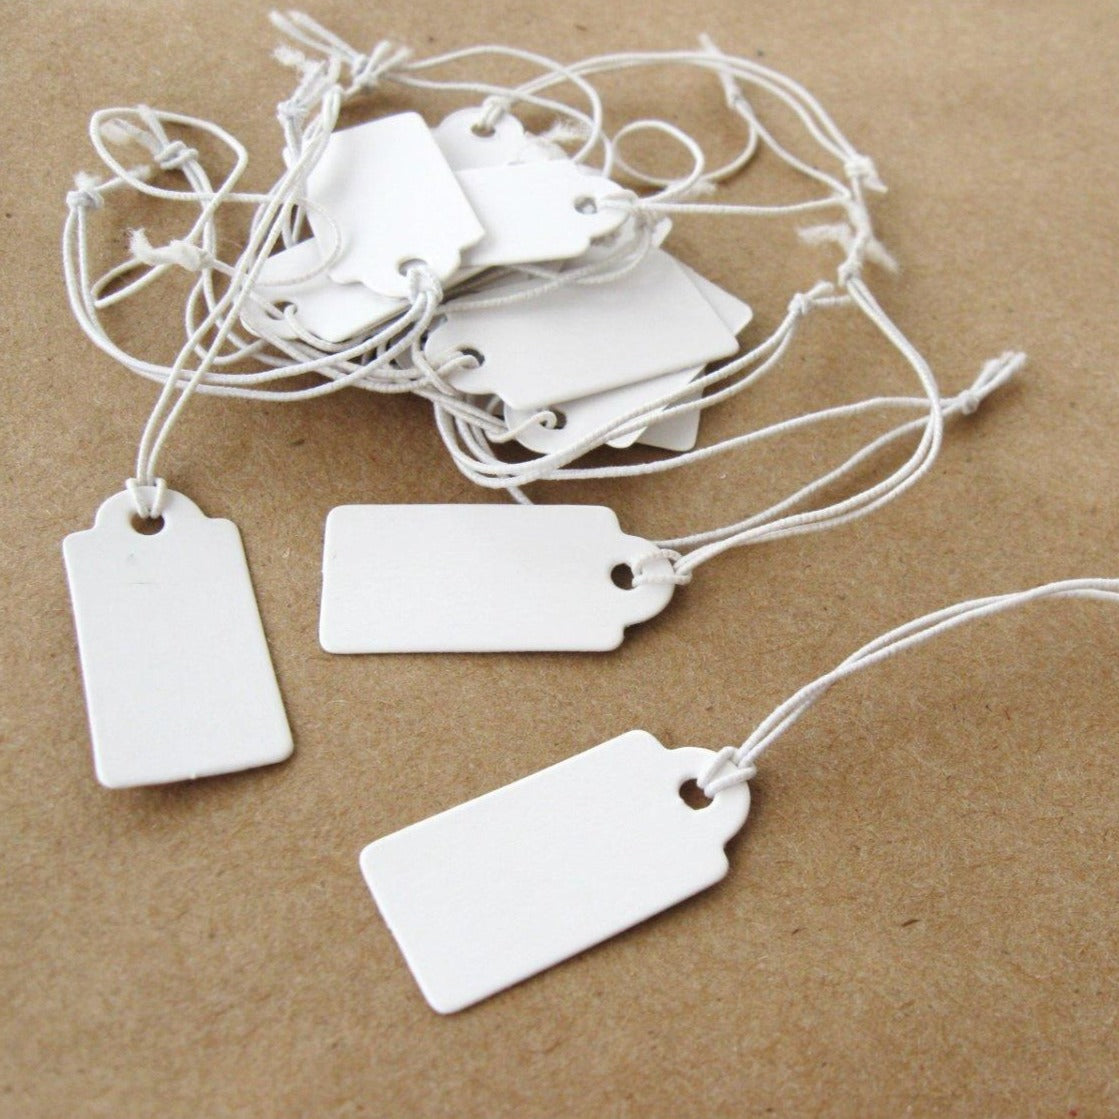 Nogis 500pcs Price Tags with String Attached White Marking Tag Small Paper Price Labels Clothing Hanging Stickers Blank Labeling Strung Label Hang